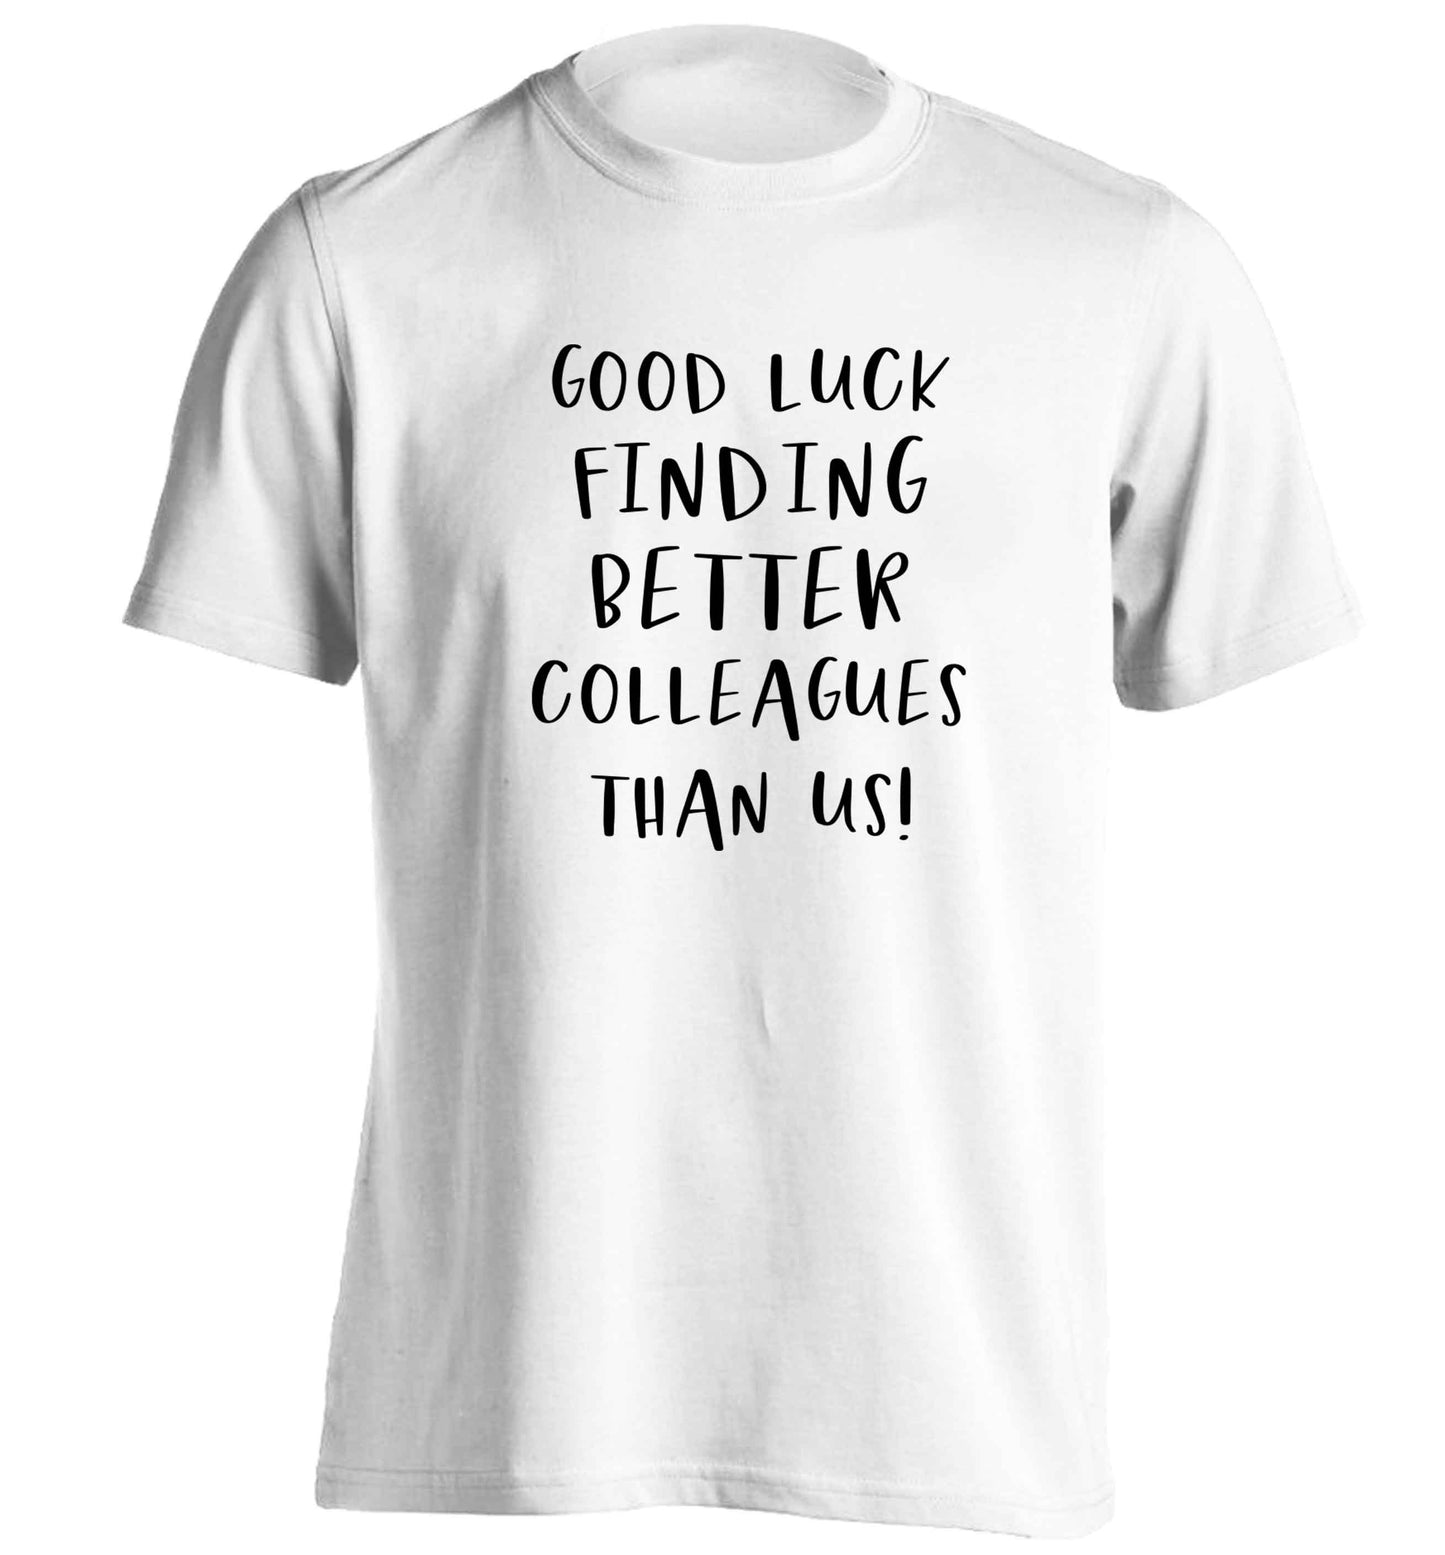 Good luck finding better colleagues than us! adults unisex white Tshirt 2XL